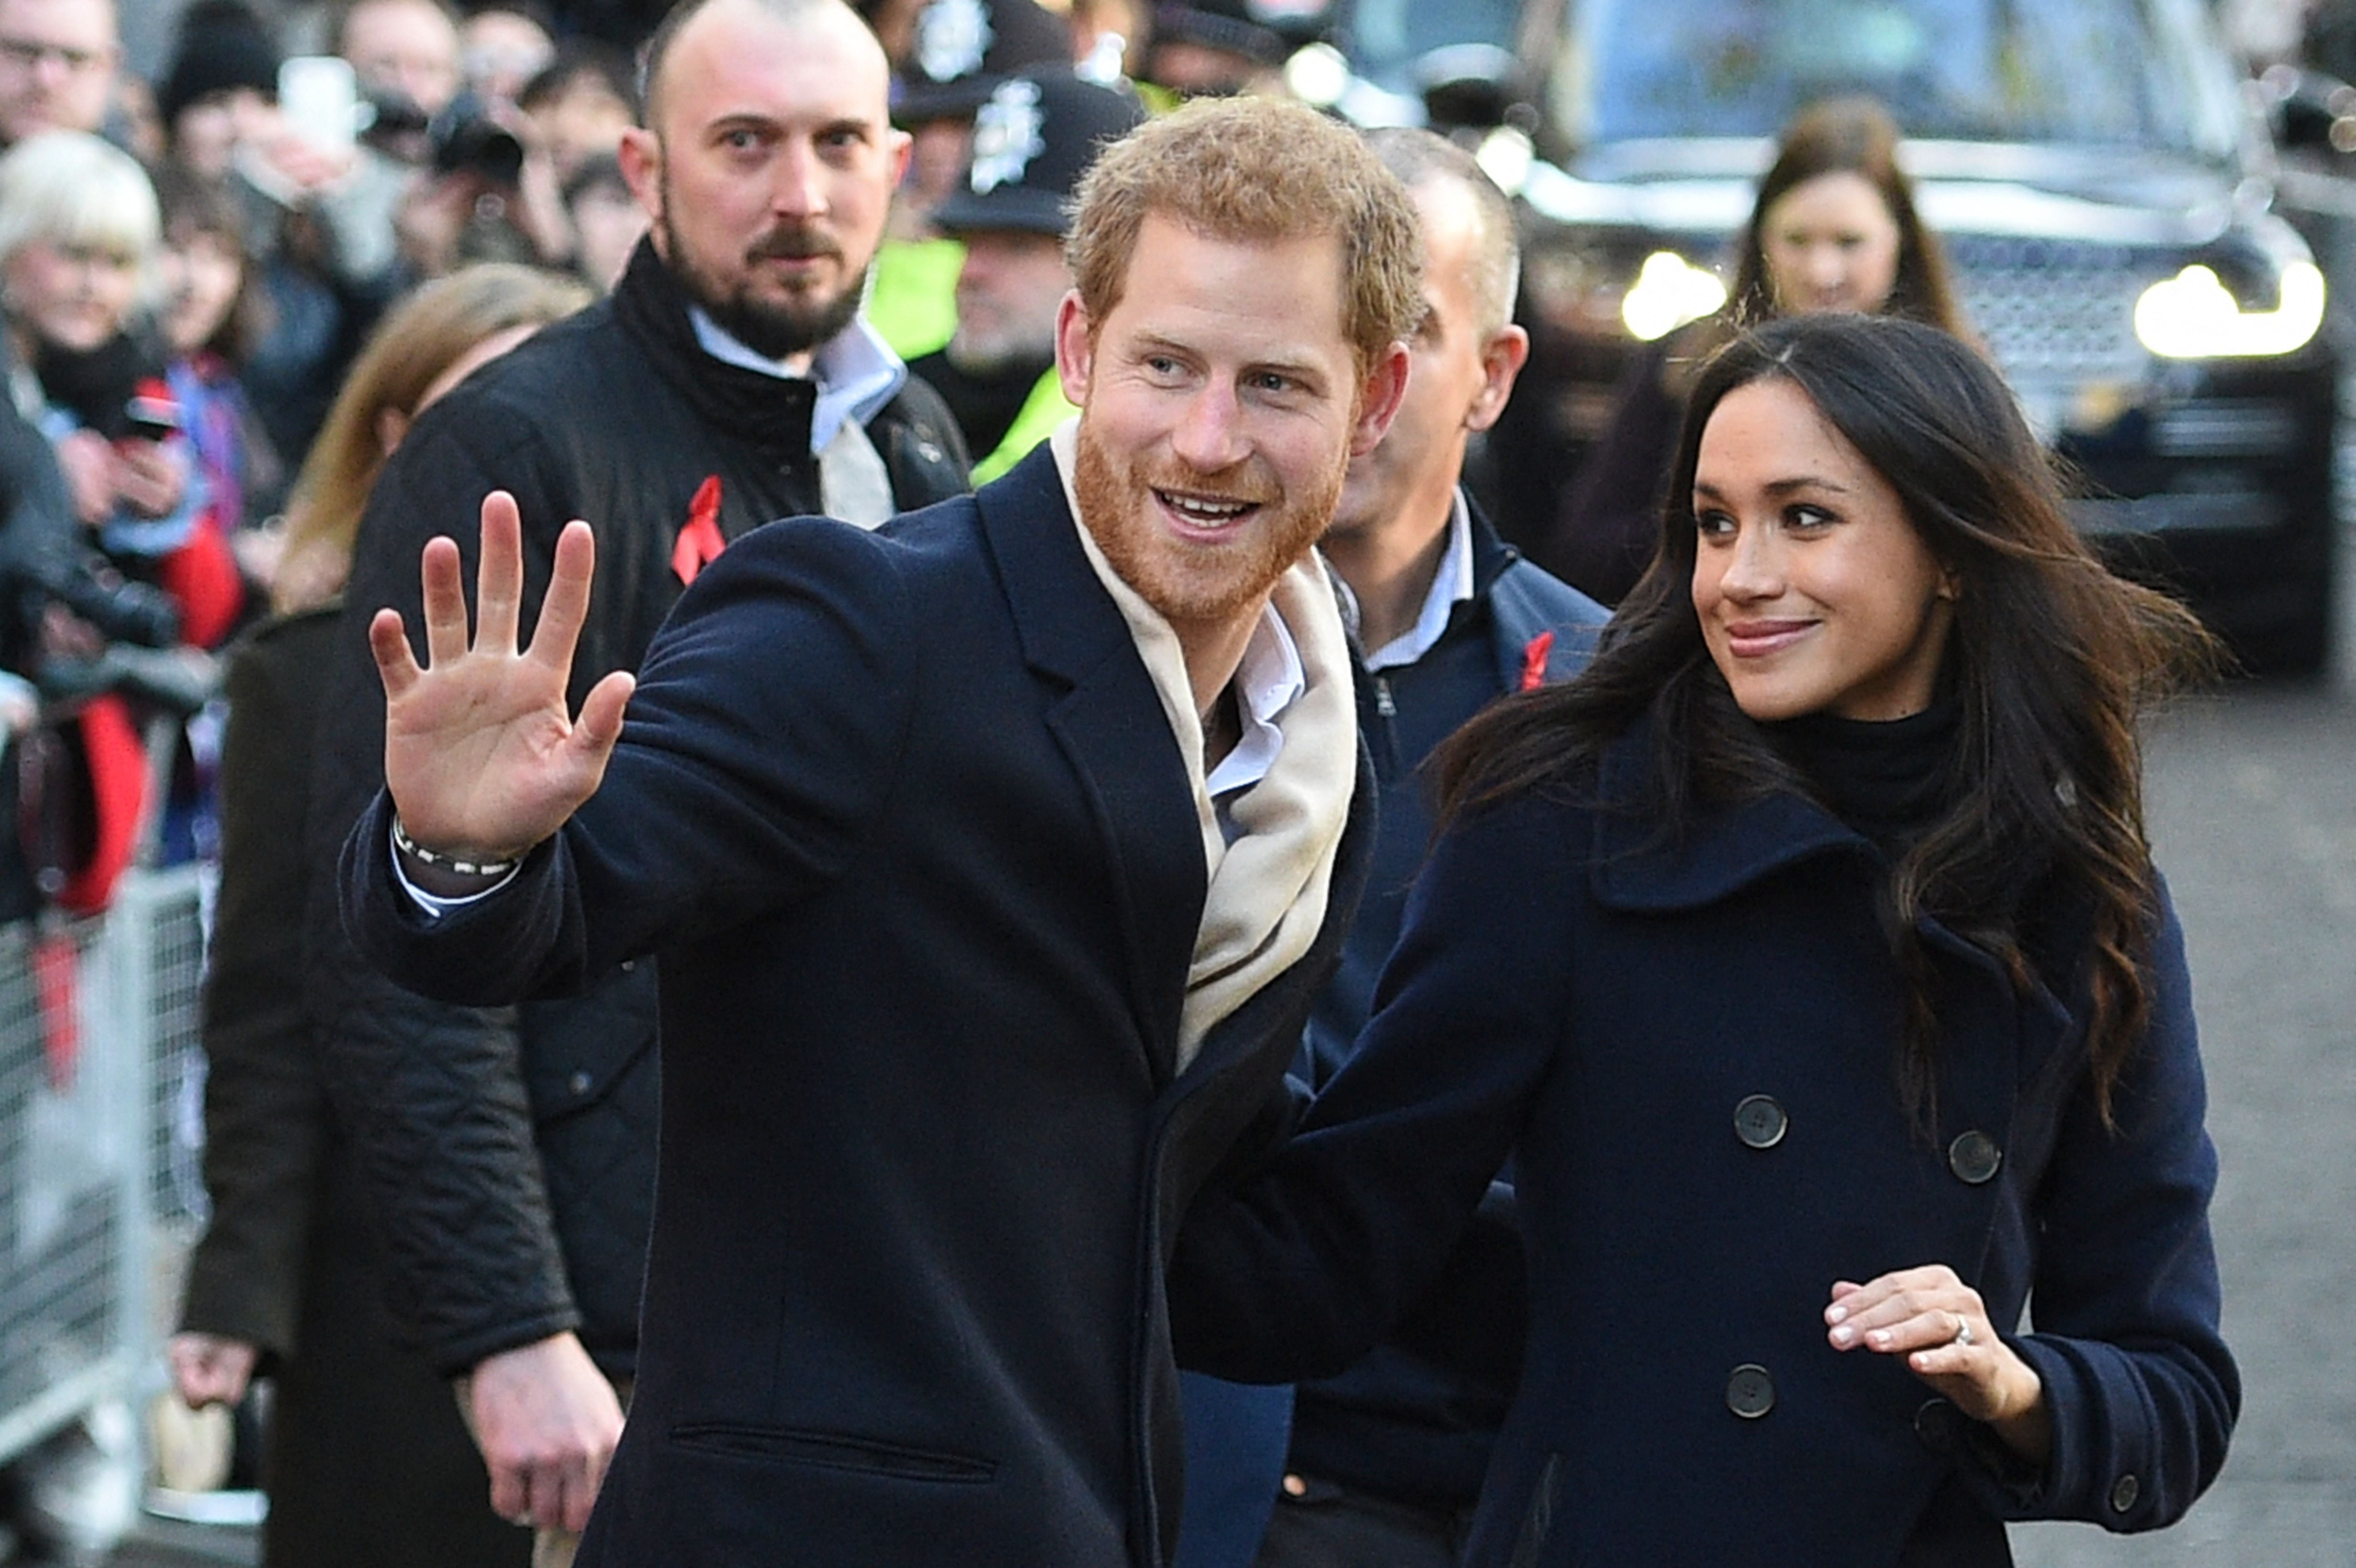 Multiple reports have claimed the Sussexes have not yet been approached by the royal family over the allegations despite the review being likely to draw in senior officials including the prime minister’s cabinet secretary